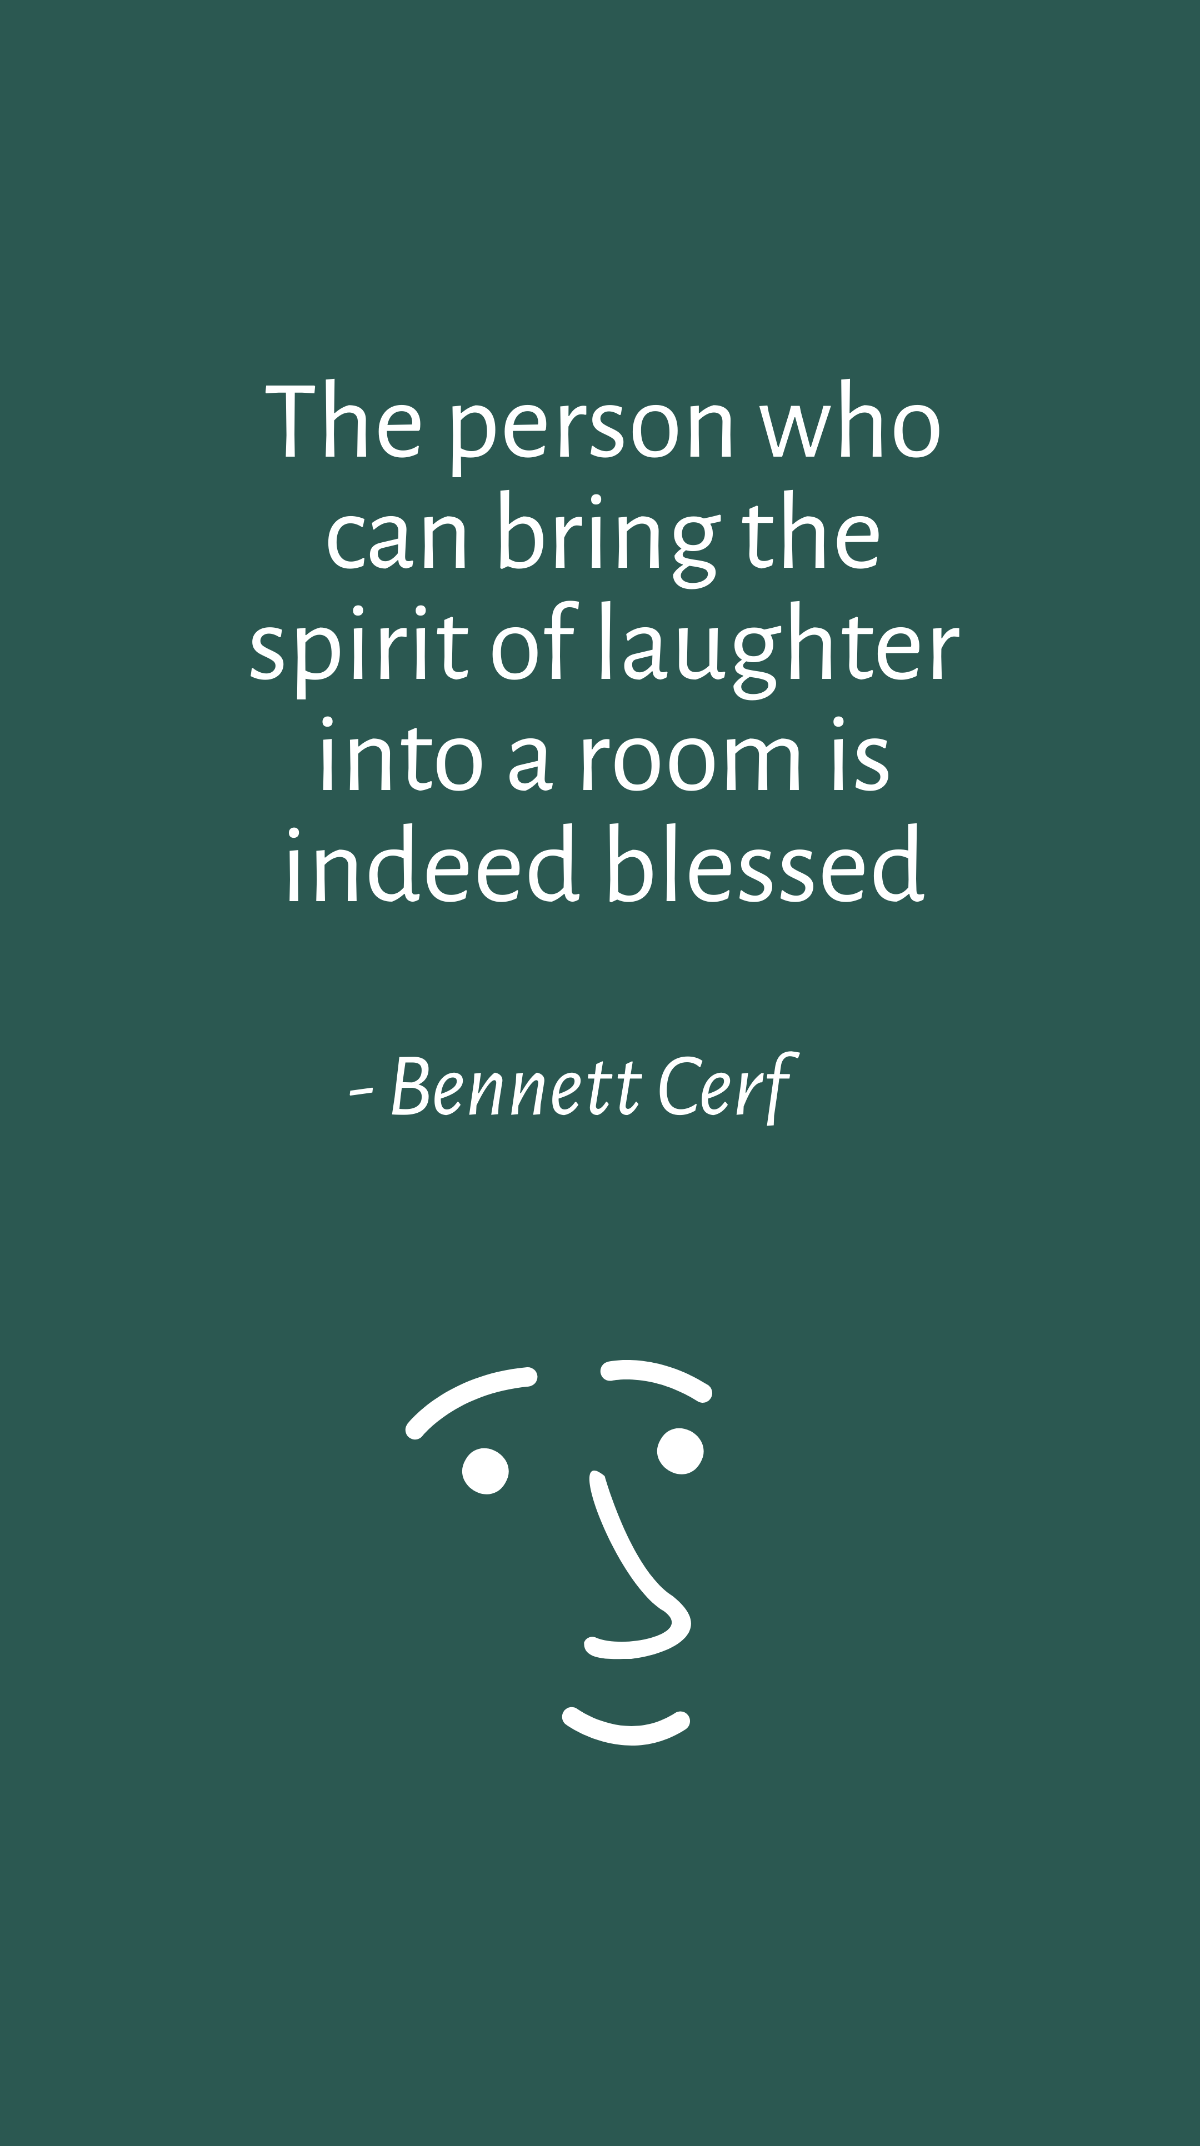 Free Bennett Cerf - The person who can bring the spirit of laughter into a room is indeed blessed Template